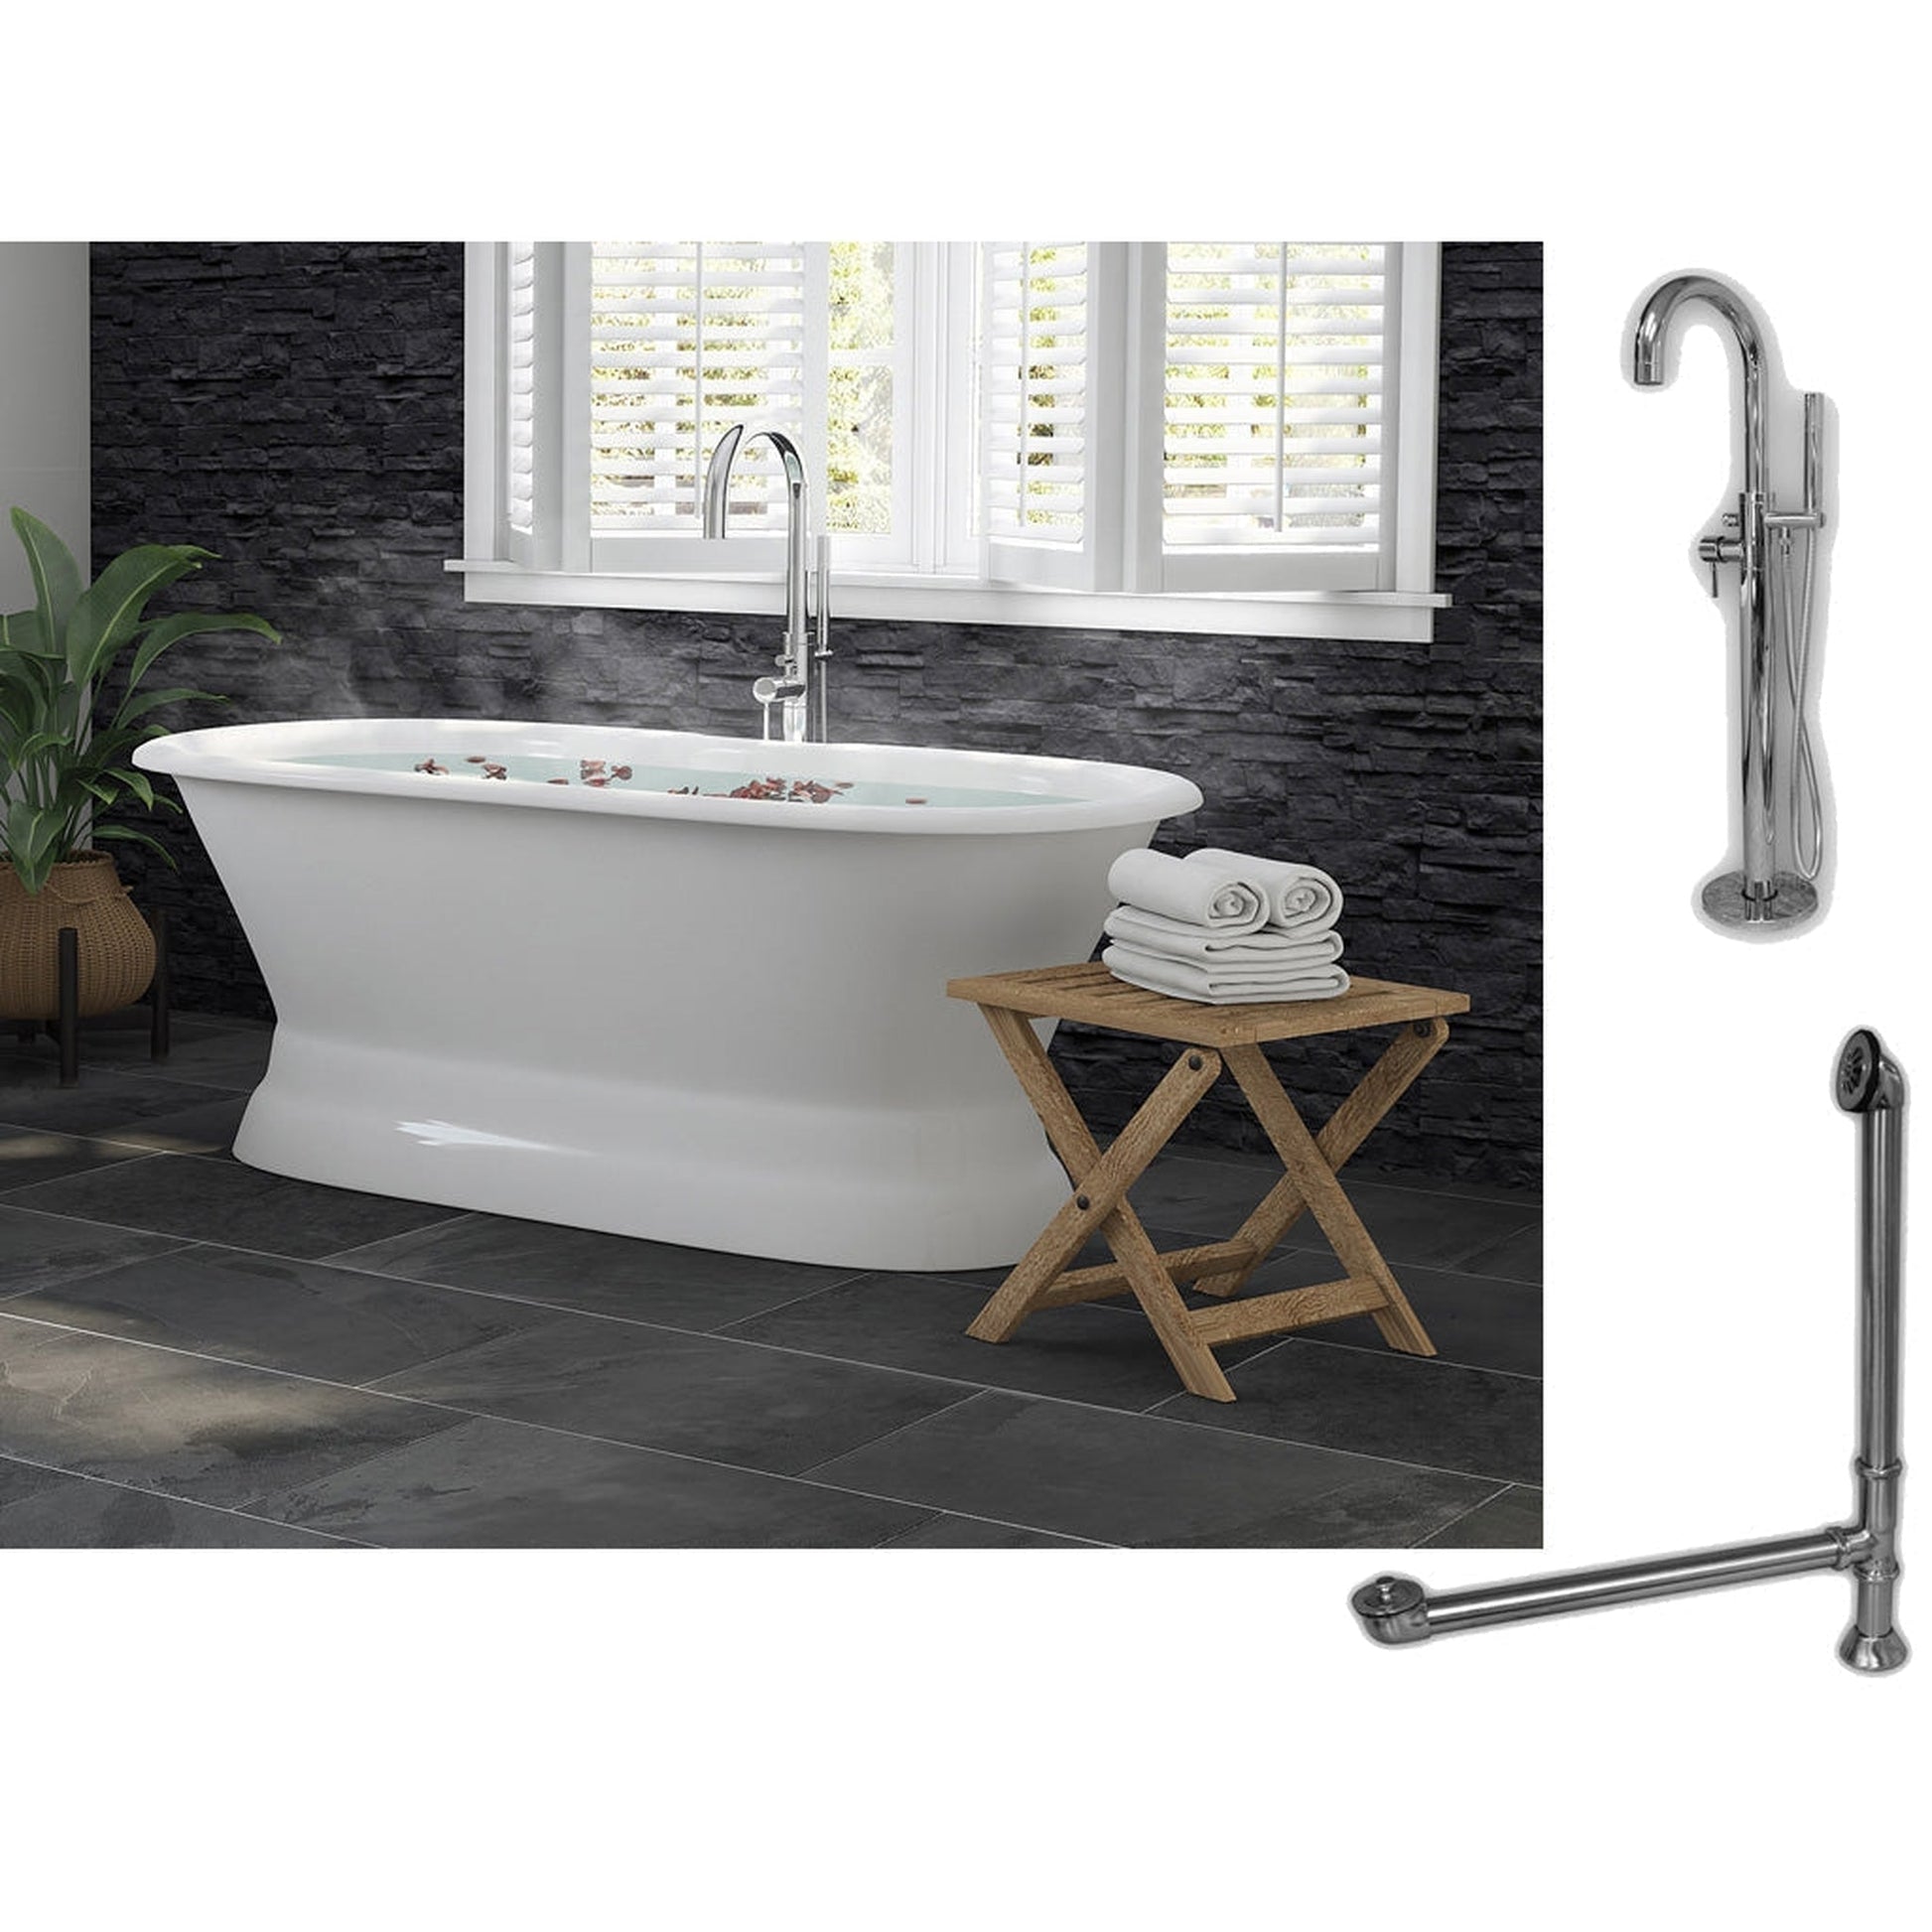 Cambridge Plumbing 66" White Cast Iron Double Ended Pedestal Bathtub With No Deck Holes And Complete Plumbing Package Including Modern Floor Mounted Faucet, Drain And Overflow Assembly In Brushed Nickel